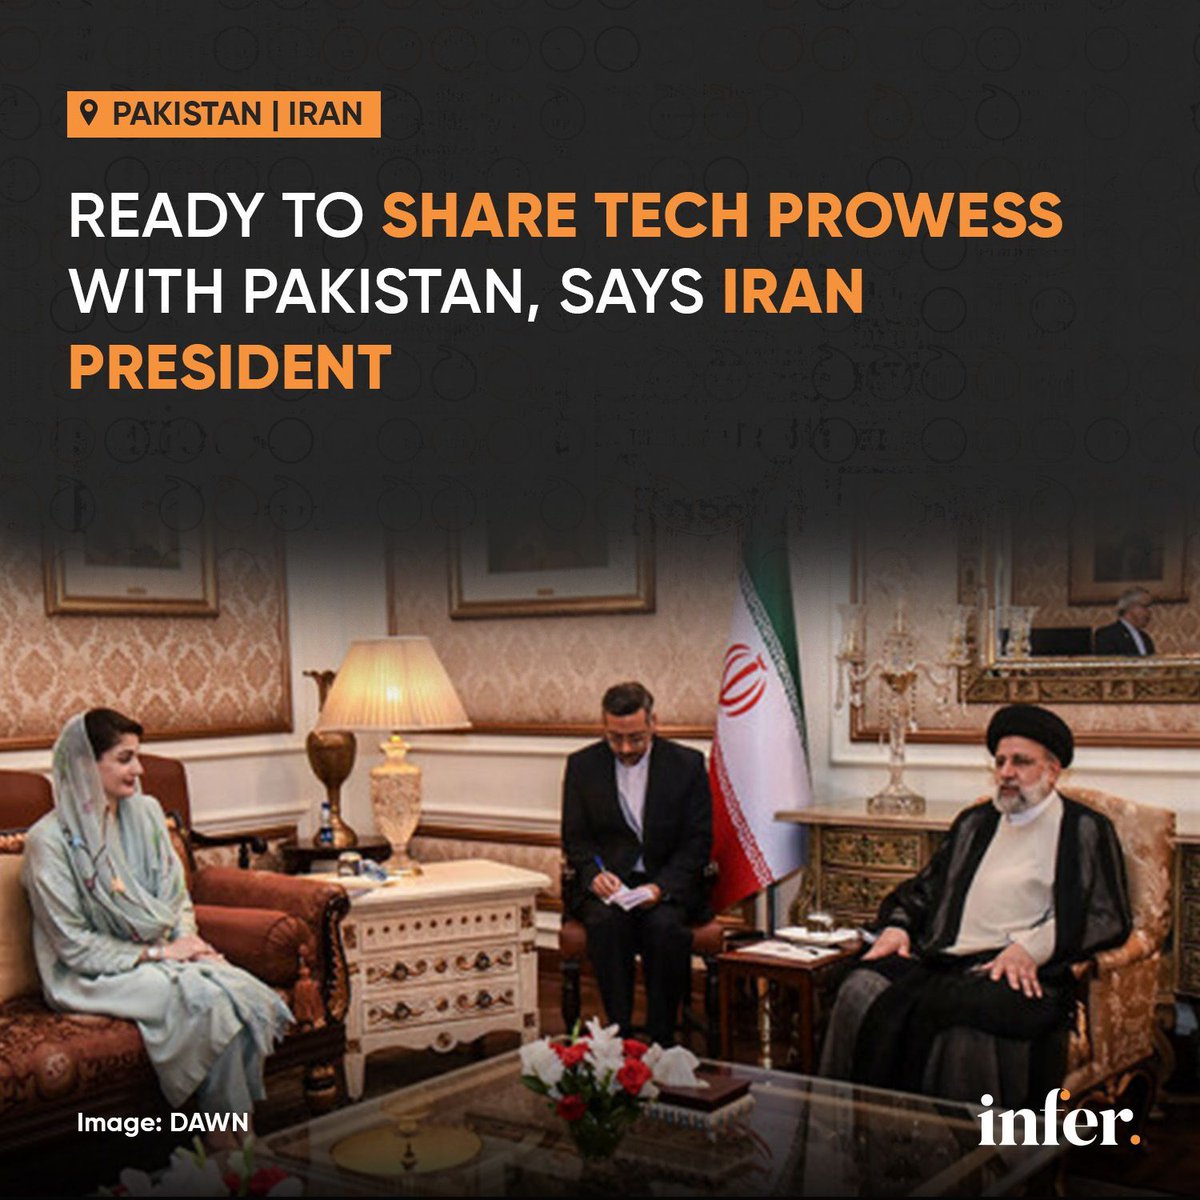 🚨: #Iran's President Raisi offers industry, science, and tech exchange with Pakistan during visit to Lahore and Karachi. Ready to share expertise despite challenges. 

#IranPakistan #KnowledgeExchange #BreakingNews #infer